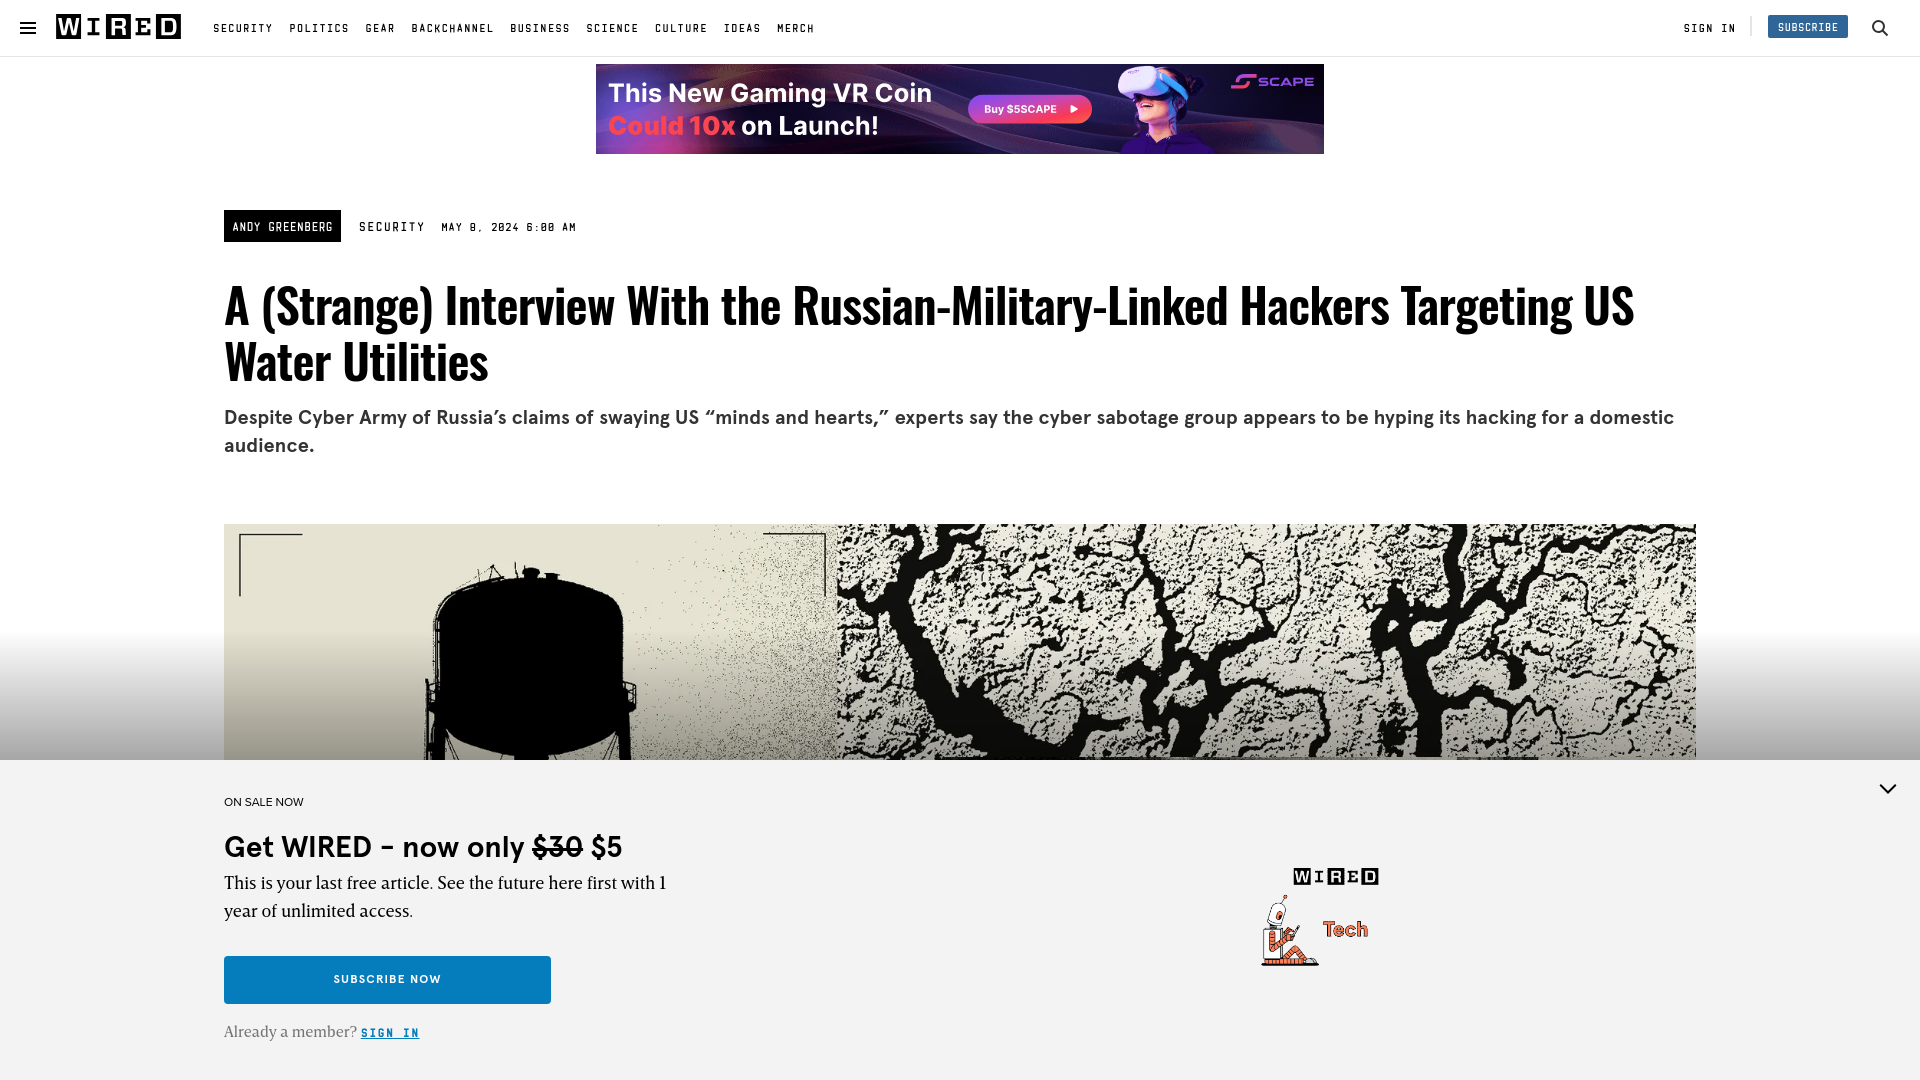 A (Strange) Interview With the Russian-Military-Linked Hackers Targeting US Water Utilities | WIRED